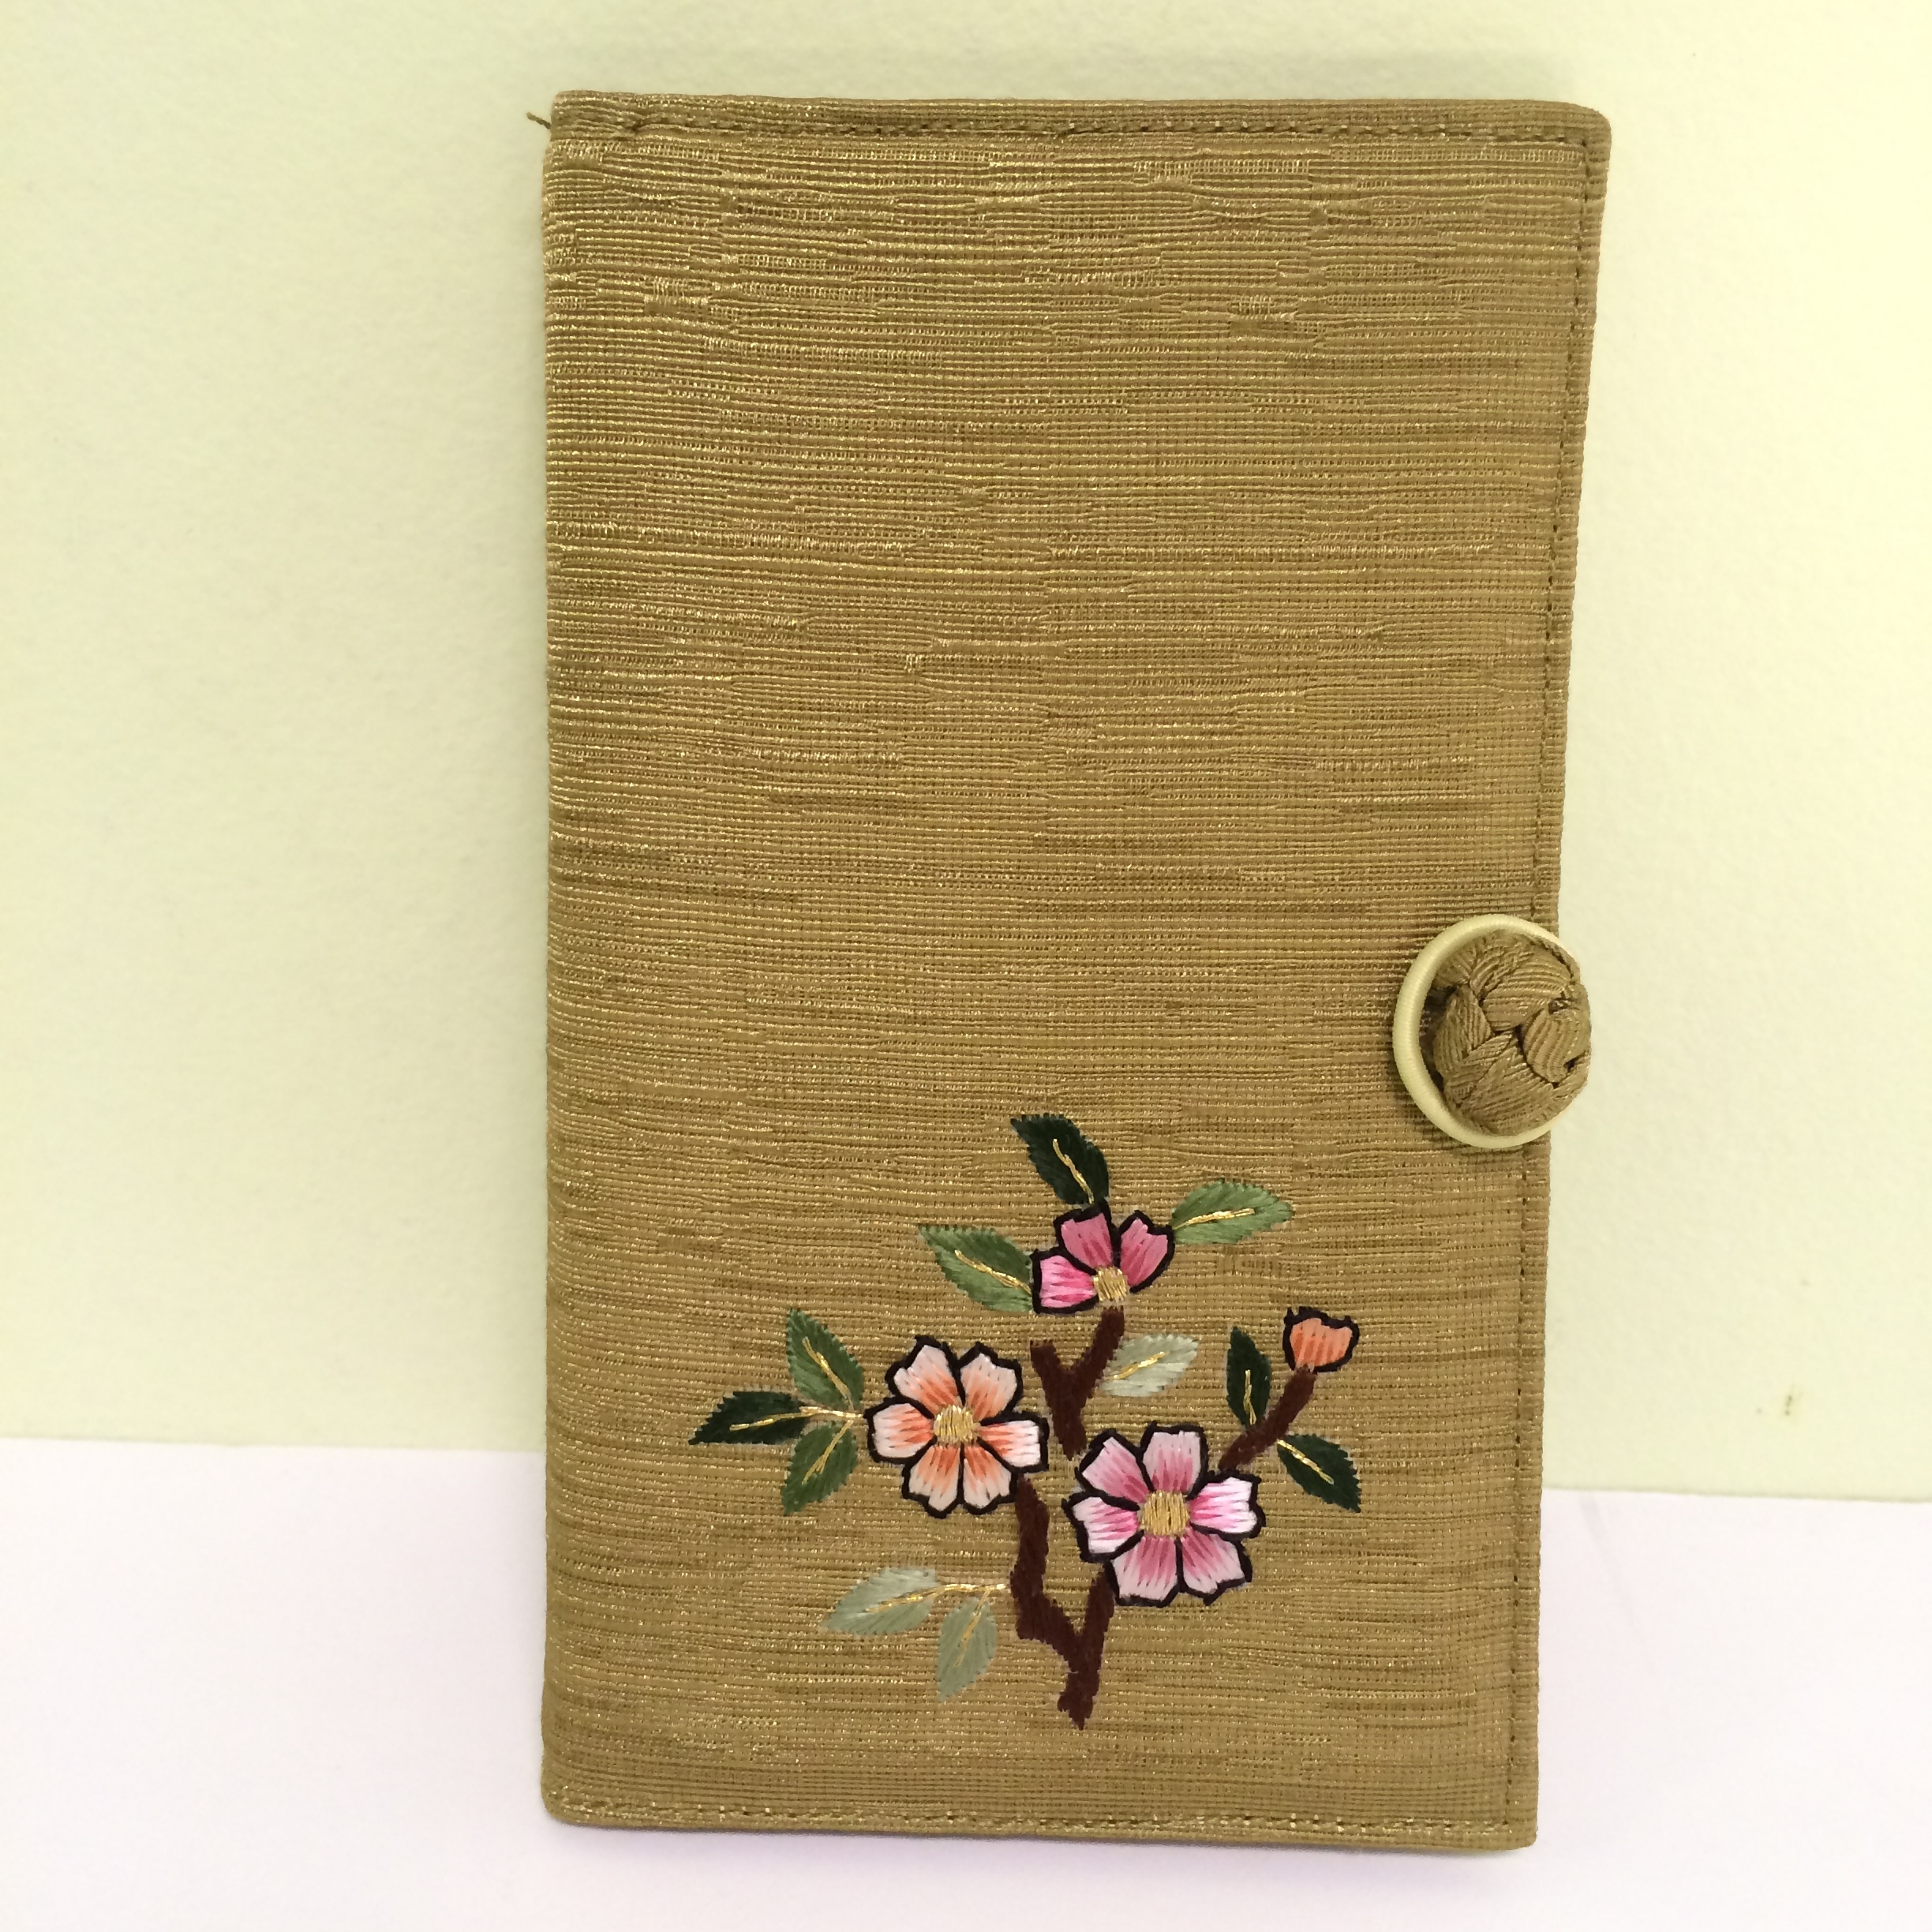 Chinese Hard Tie Clasp Coin Purse, Gold with Pink Flowers